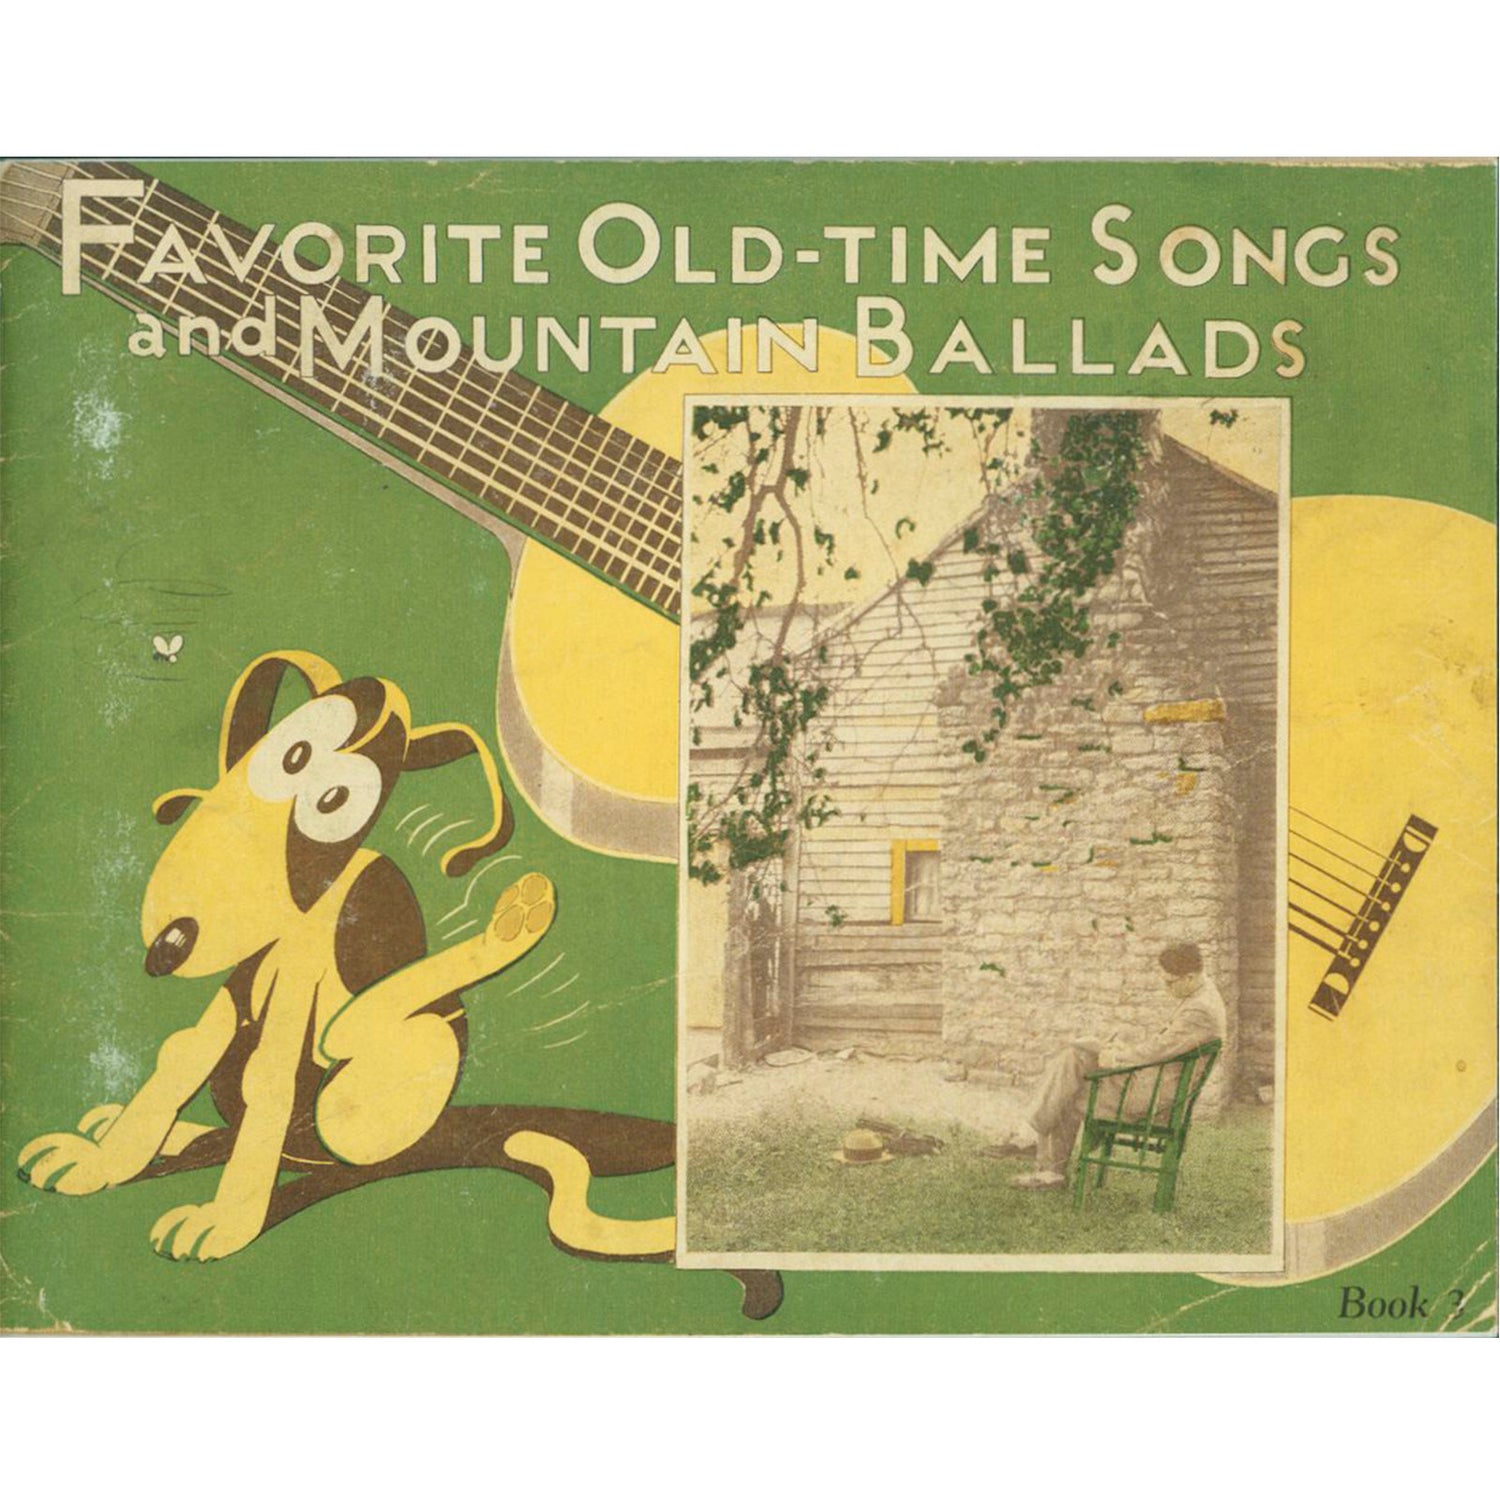 Image 1 of Favorite Mountain Ballads and Old-Time Songs Book 3 - SKU# 262-24 : Product Type Media : Elderly Instruments